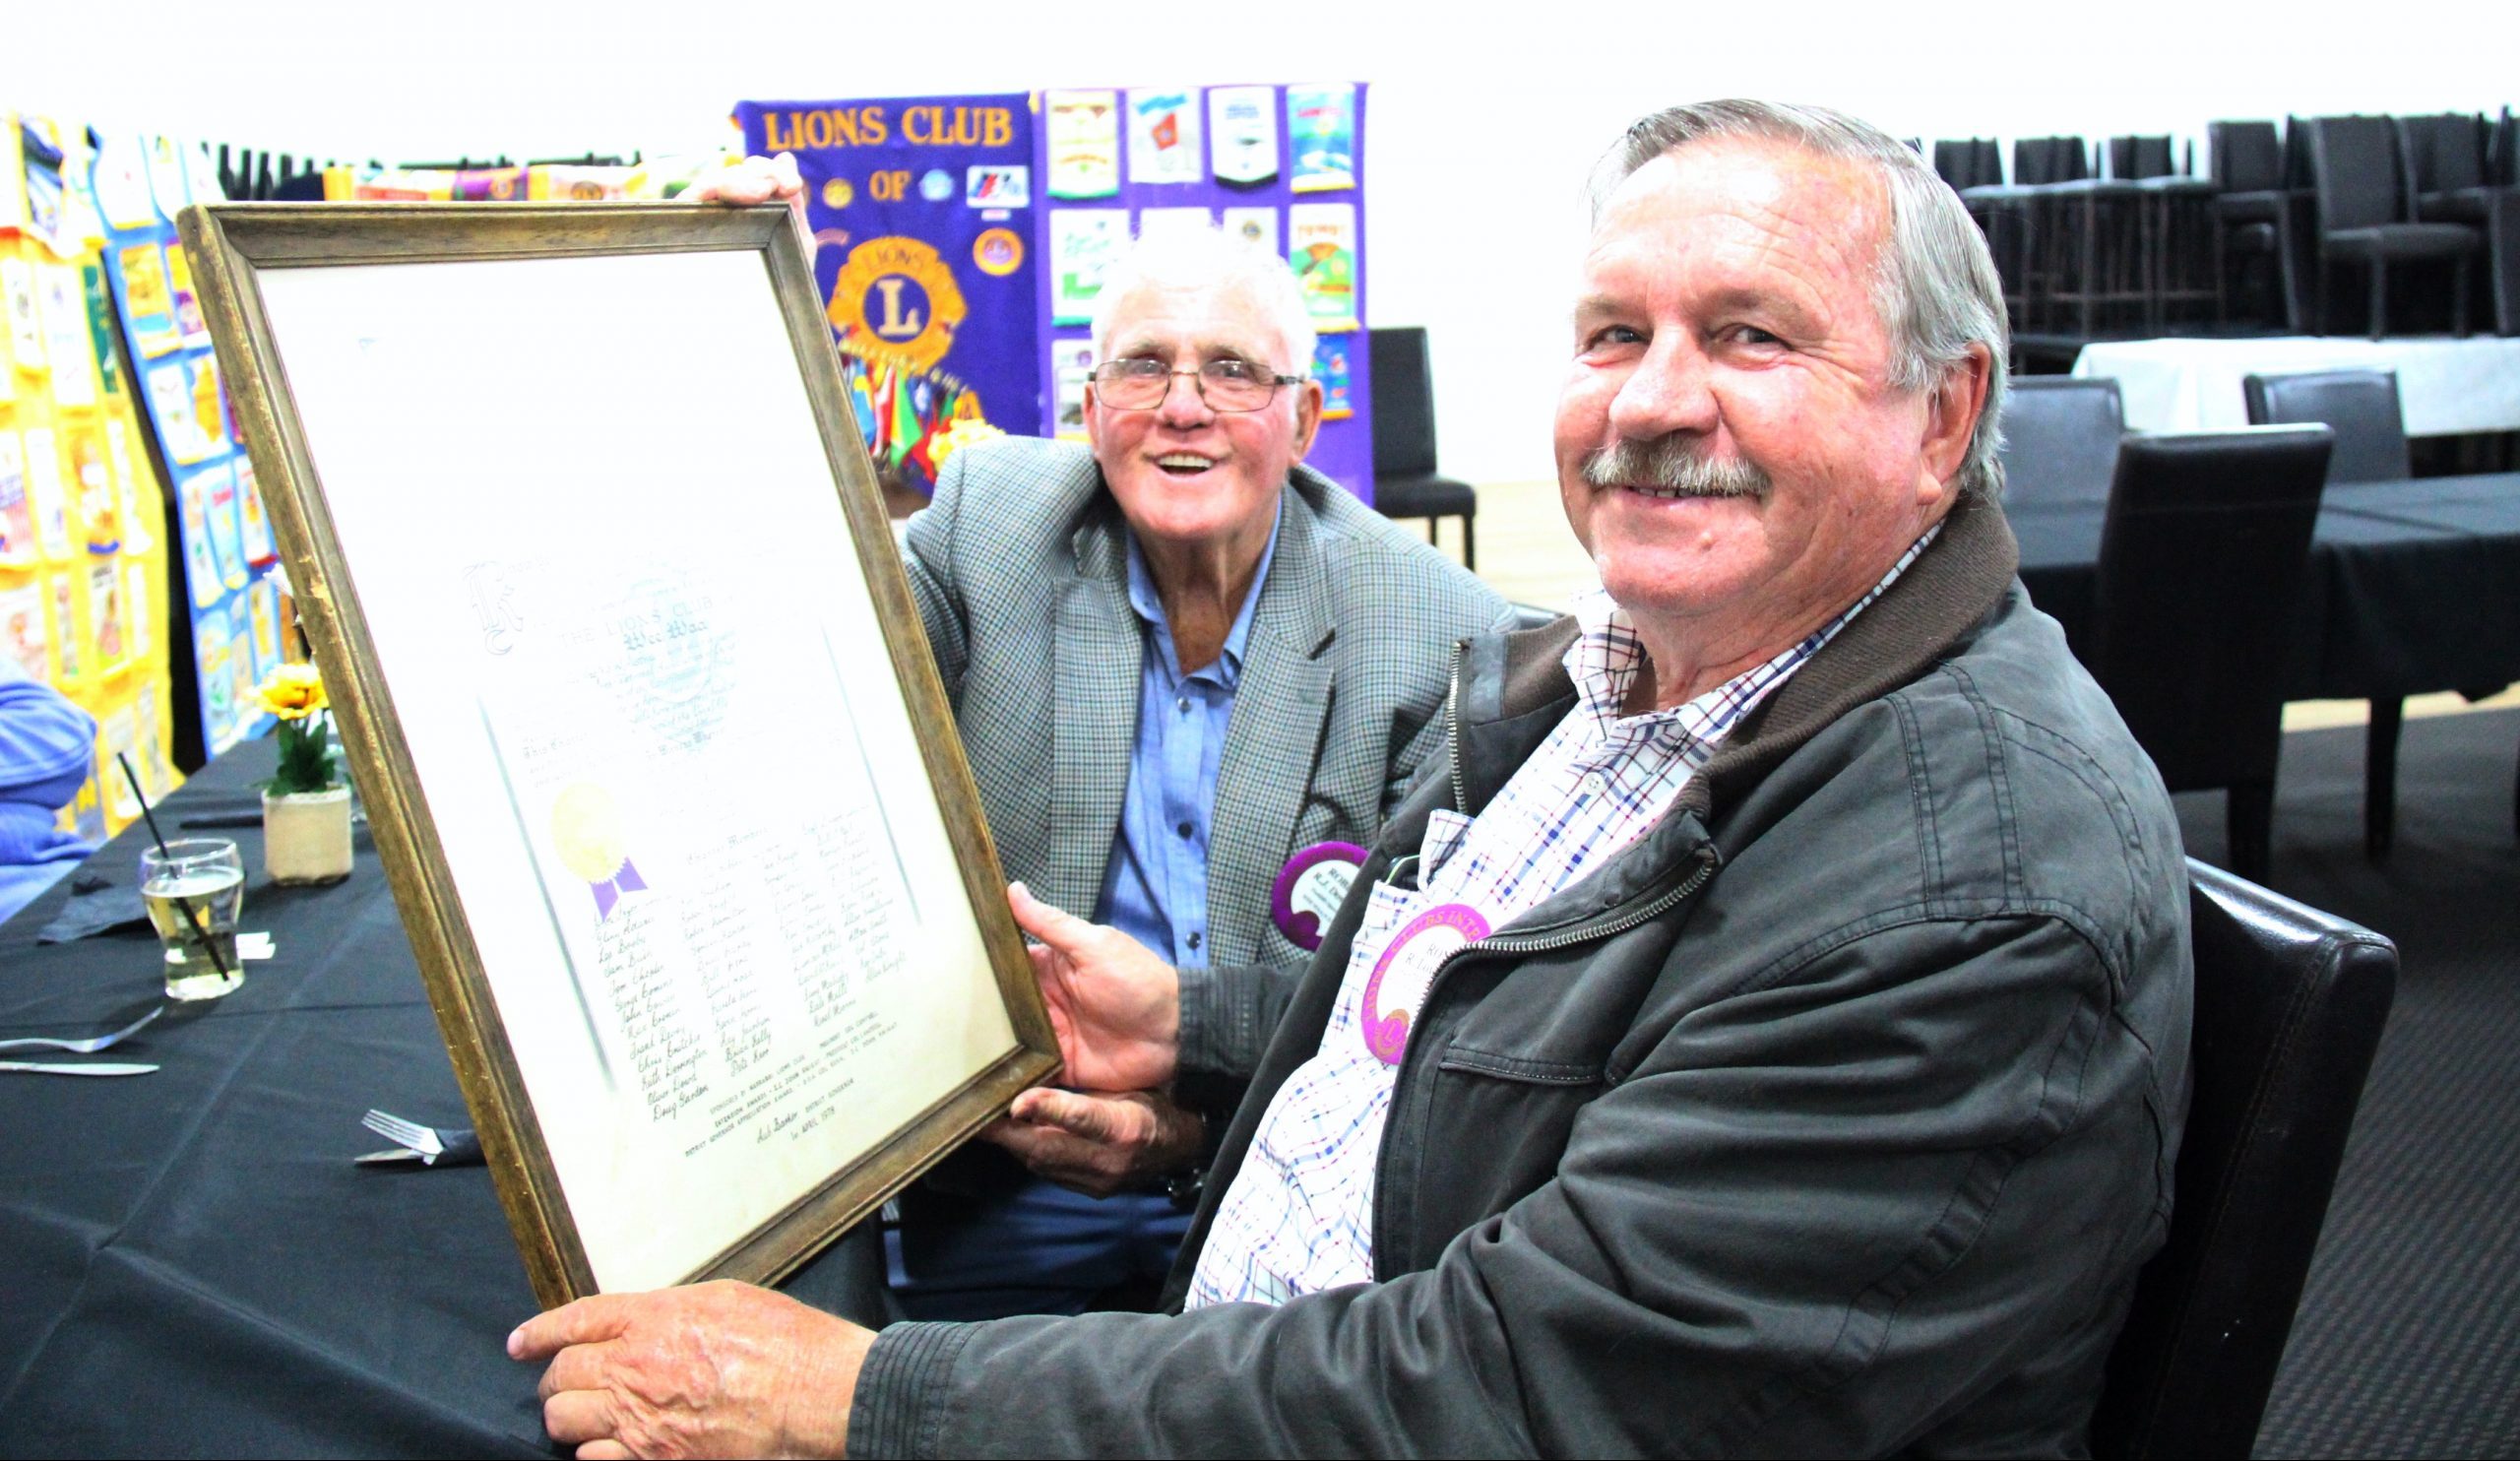 Rob Downey and Ron Lowder holding the Wee Waa Lions Club’s charter, chartered on April 1, 1978.